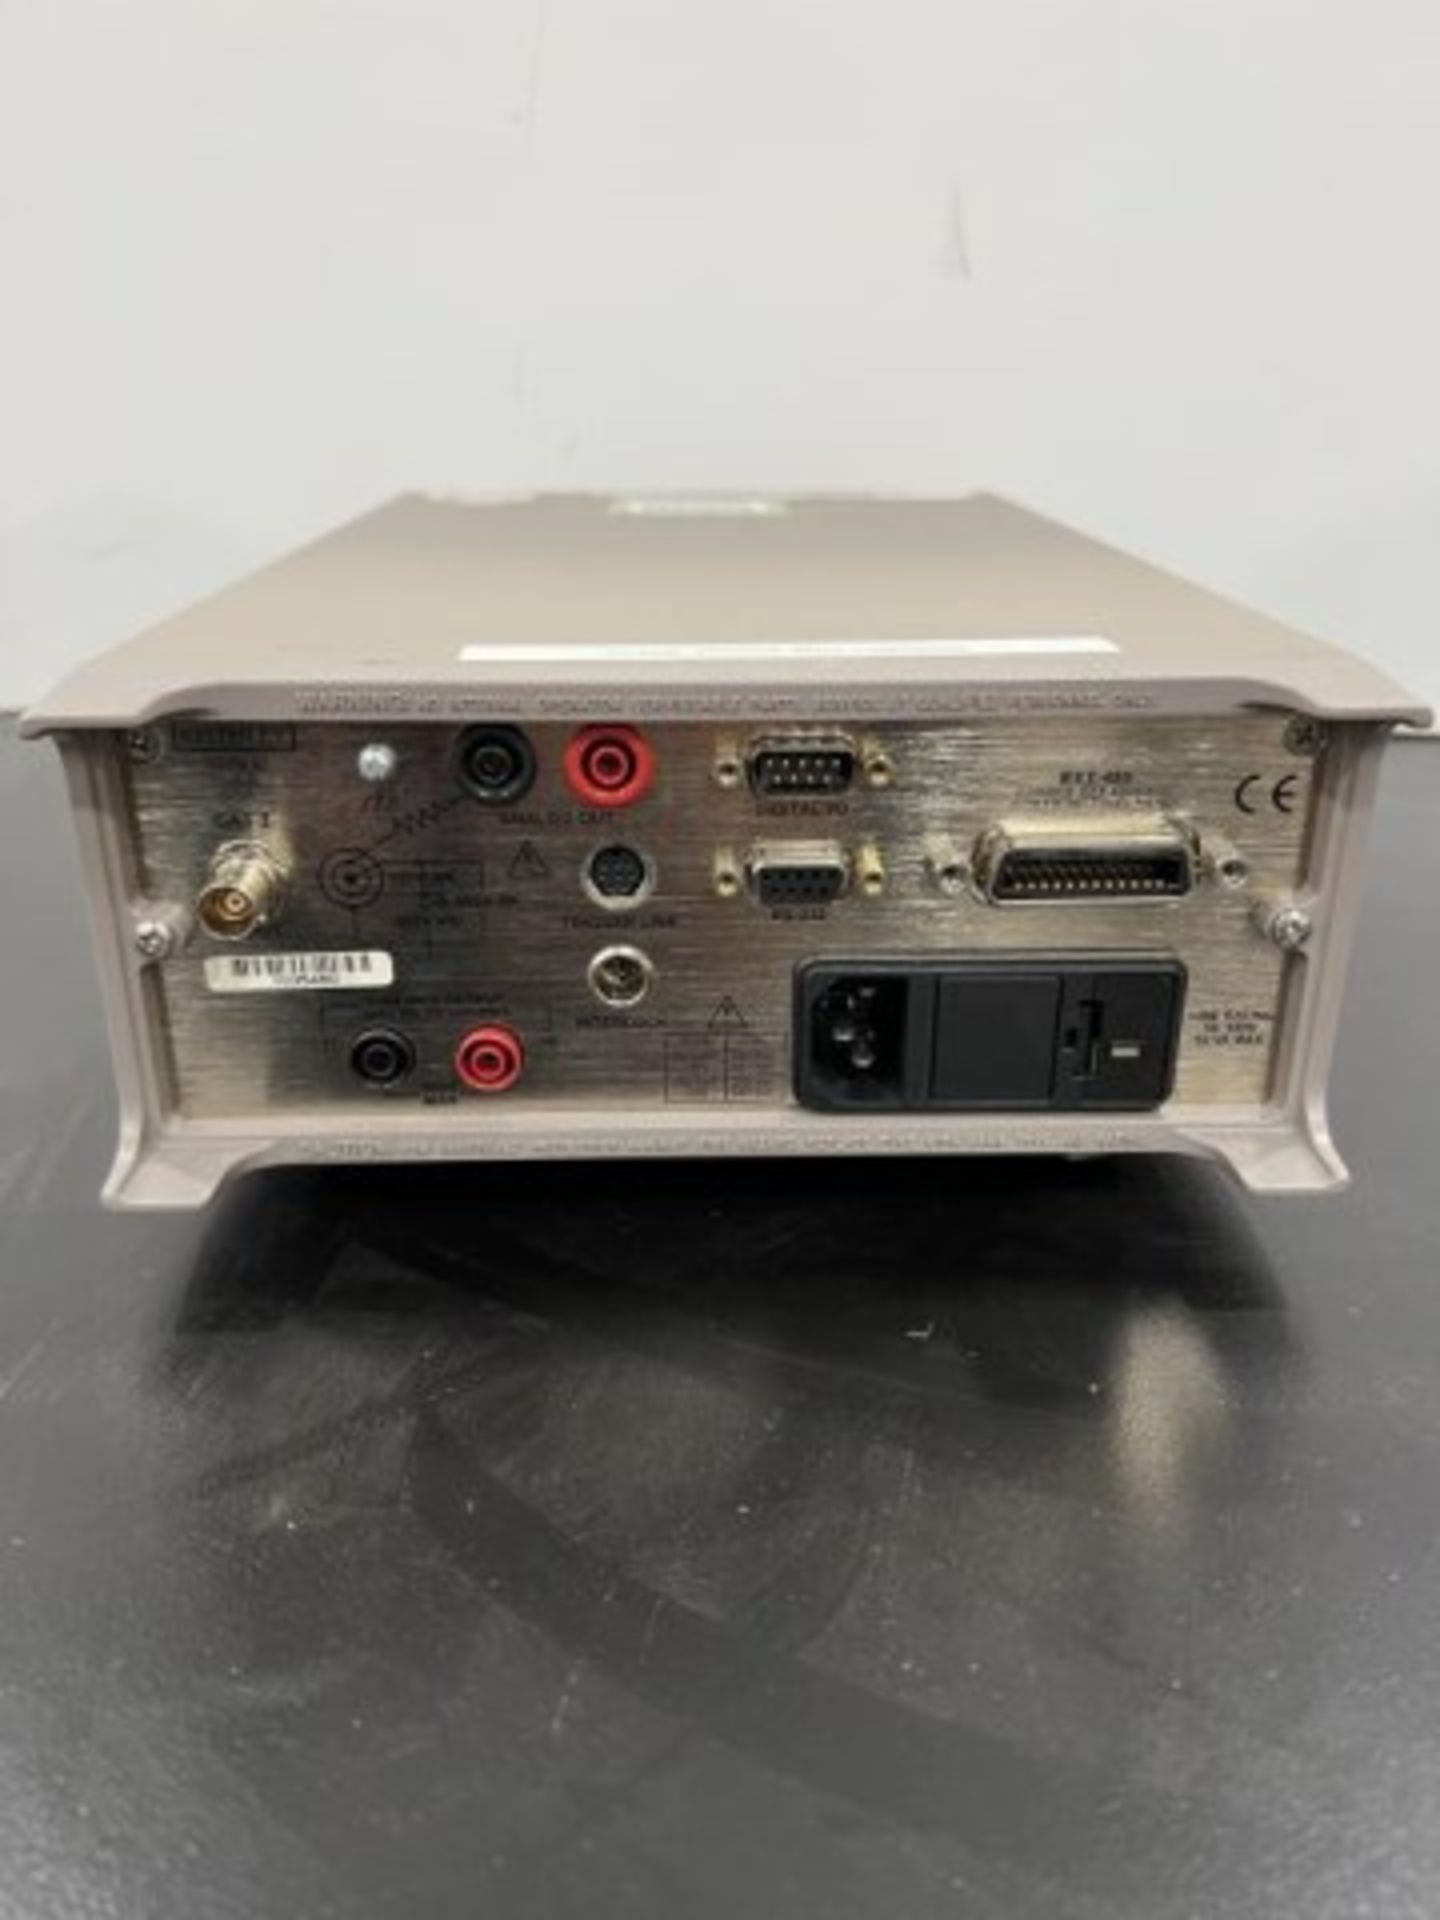 Keithley 6487 Picoammeter - Image 2 of 2